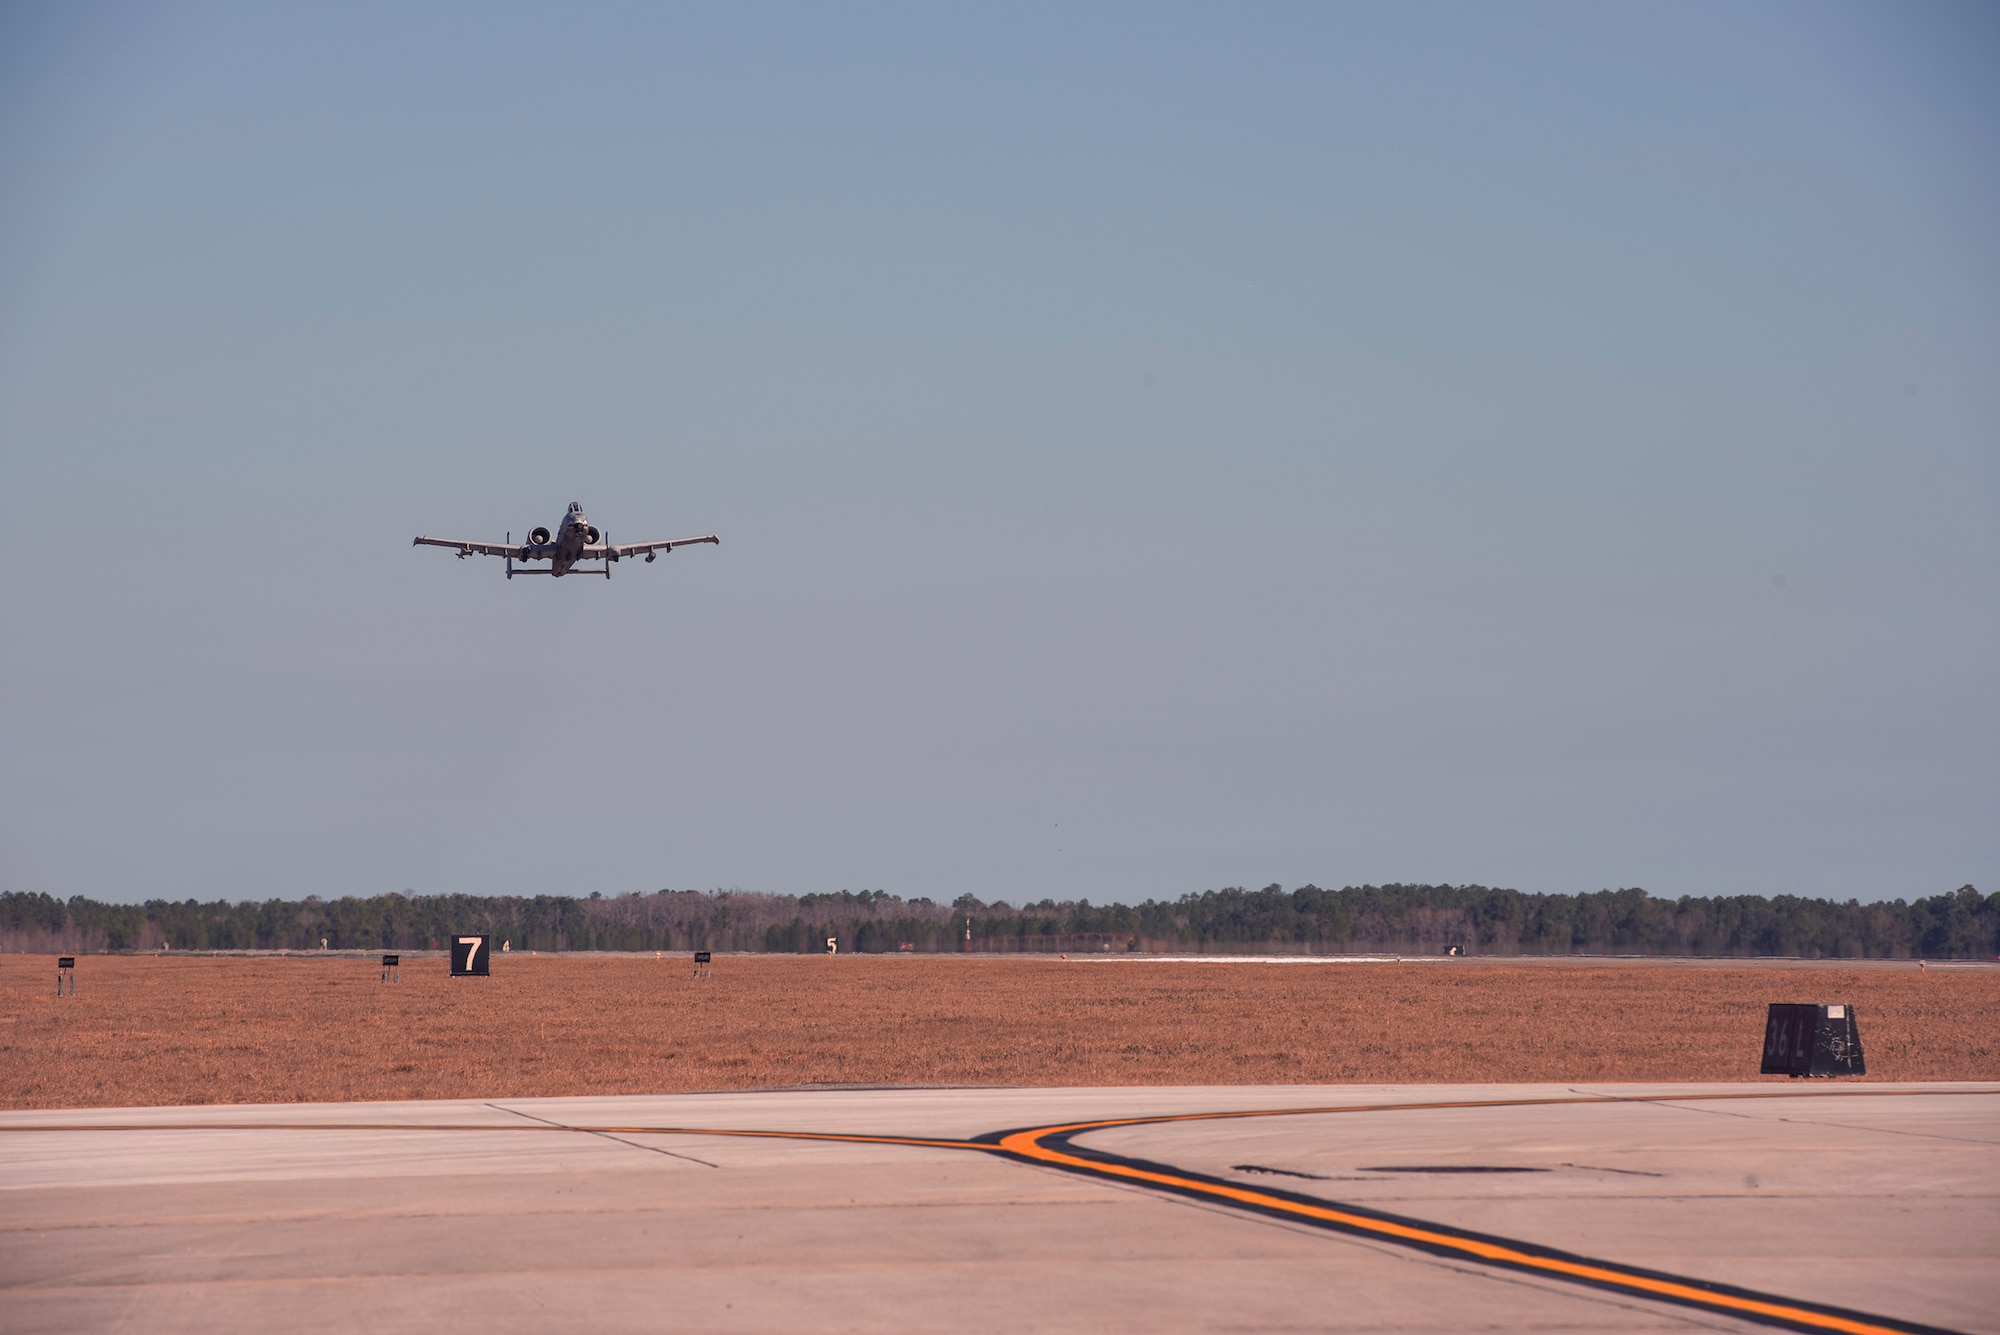 An A-10C Thunderbolt II from the 74th Fighter Squadron launches in support of Green Flag-West, Jan. 12, 2017, at Moody Air Force Base, Ga. Green Flag-West is an air-land integration exercise that the Air Force conducts with the U.S. Army. To hone their joint interoperability, the Army will conduct large-force exercises from the ground at the National Training Center at Fort Irwin, Calif., while the Air Force provides close air support to support these training objectives at Nellis AFB, Nev.